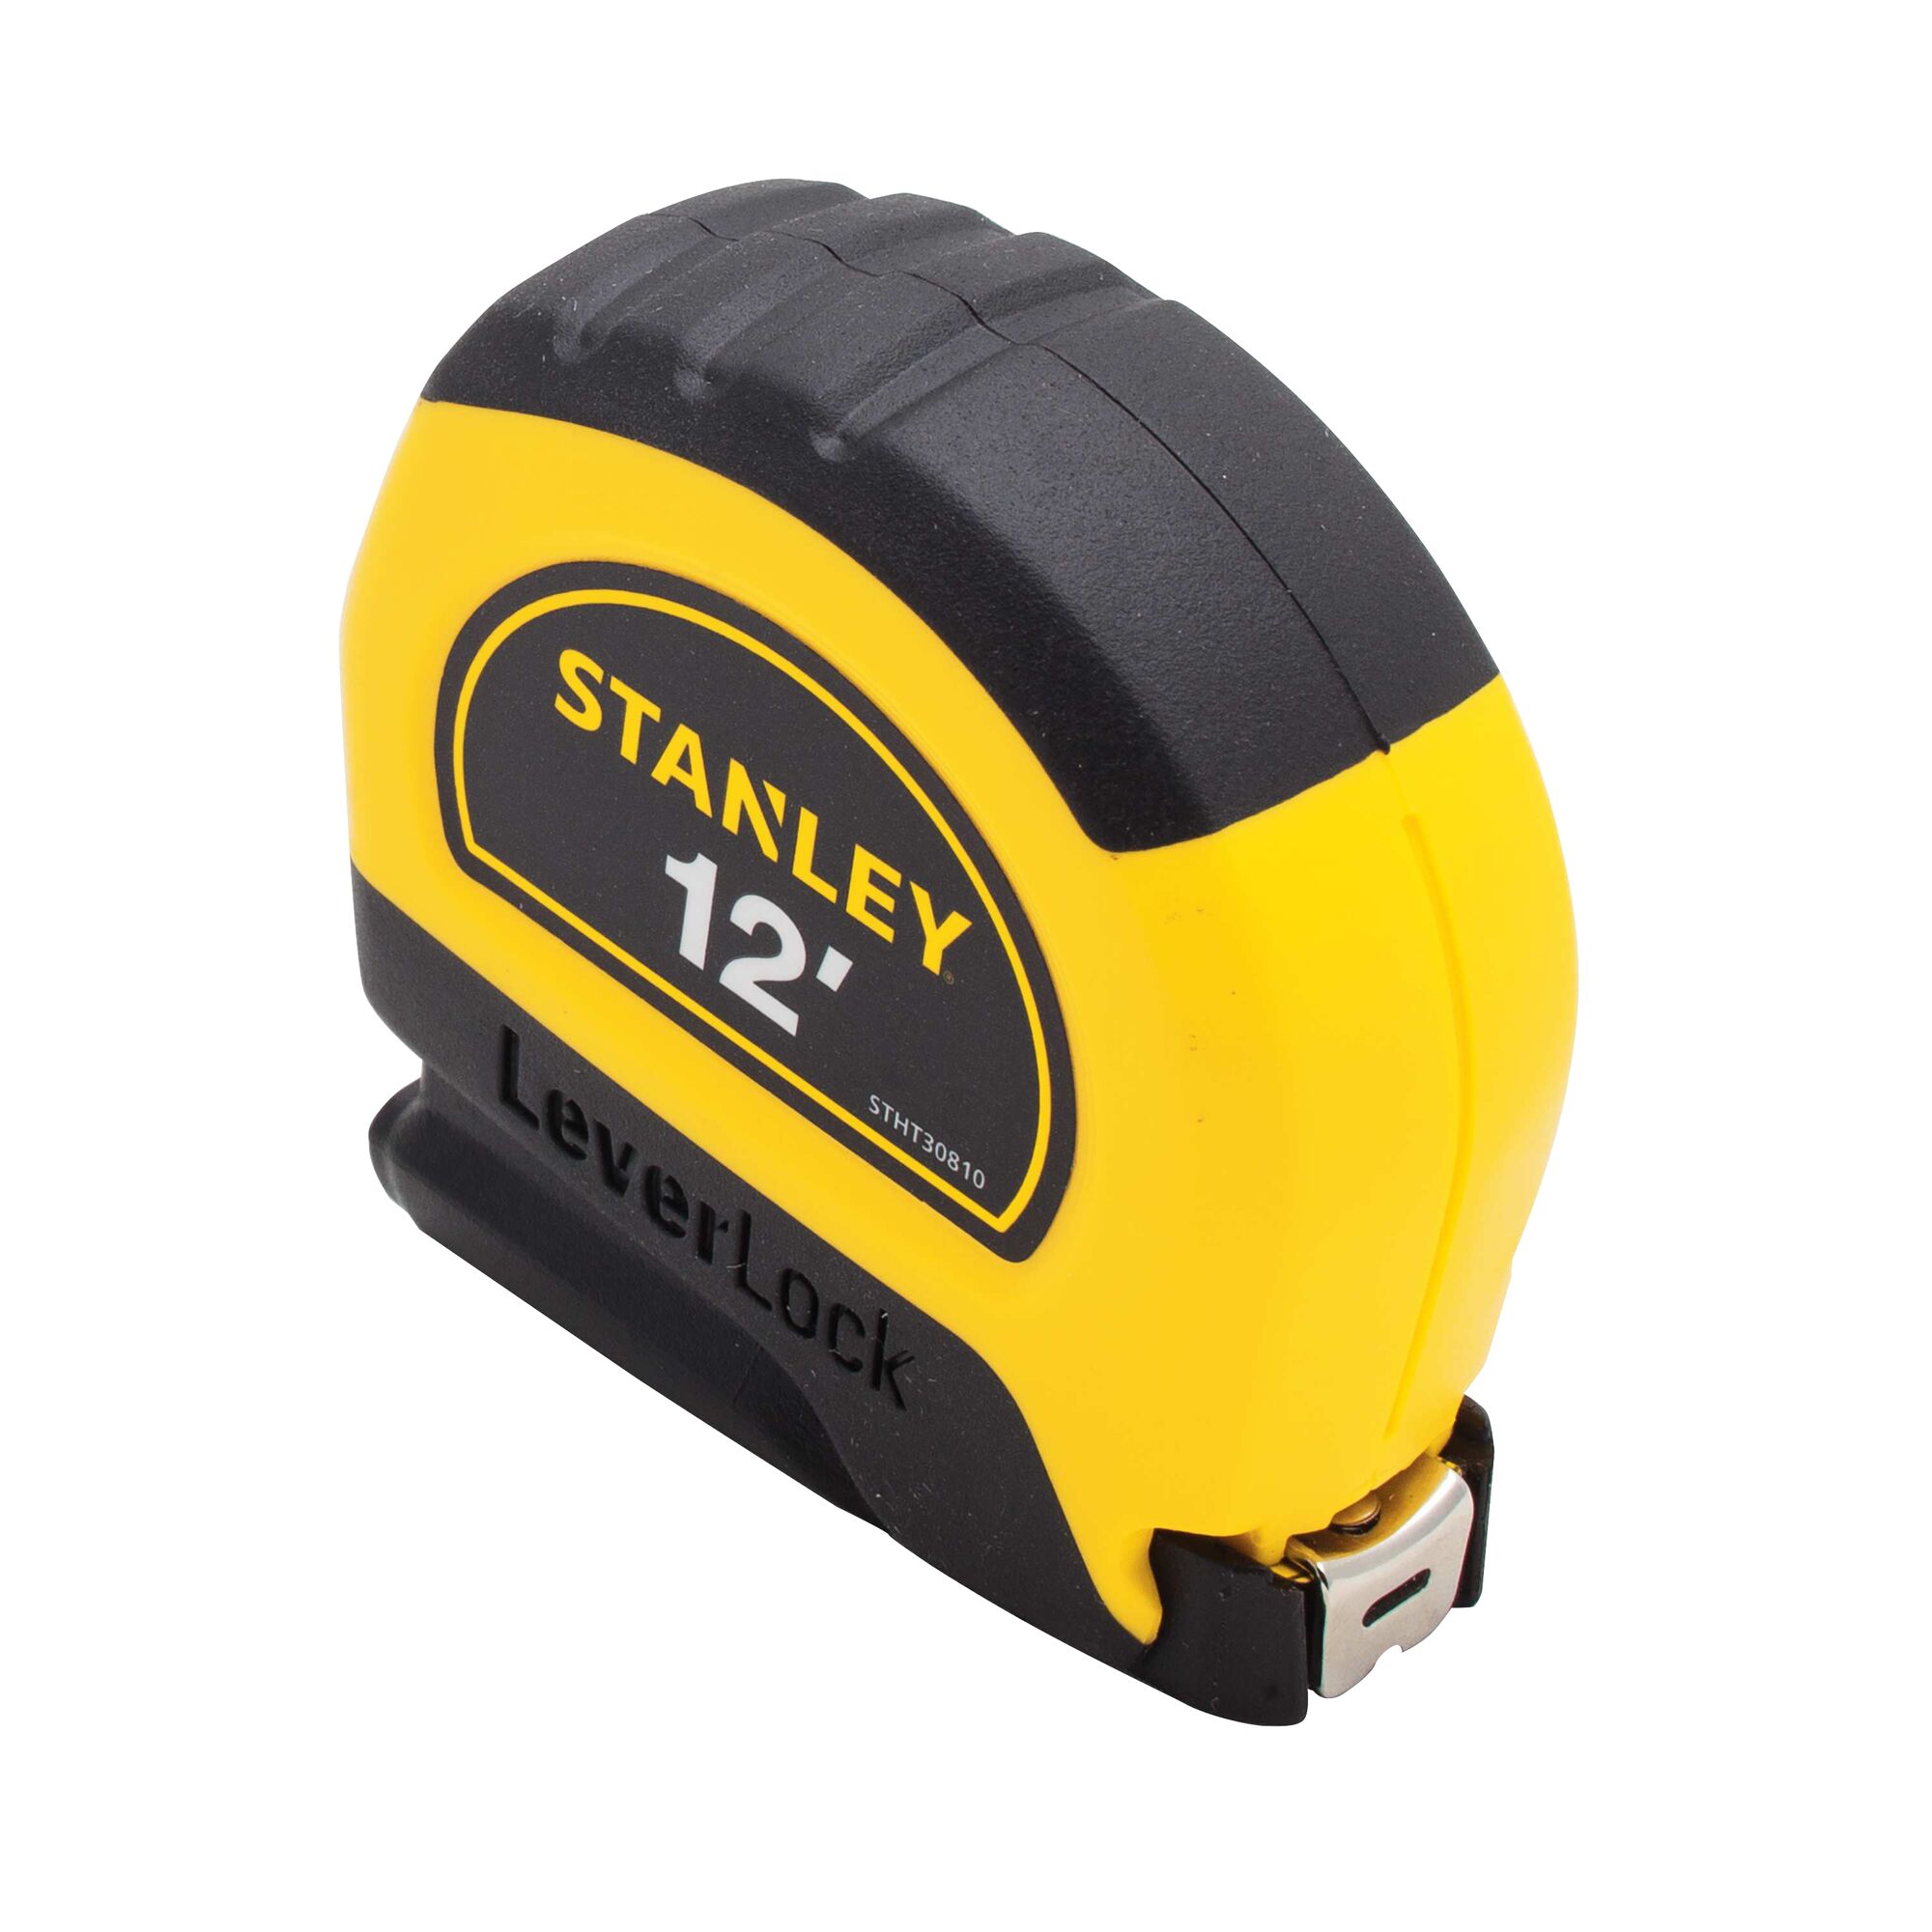 Kennedy Stronglock Tape Measure 12’-3.65m Easy Lock In Place Clip On Reverse 